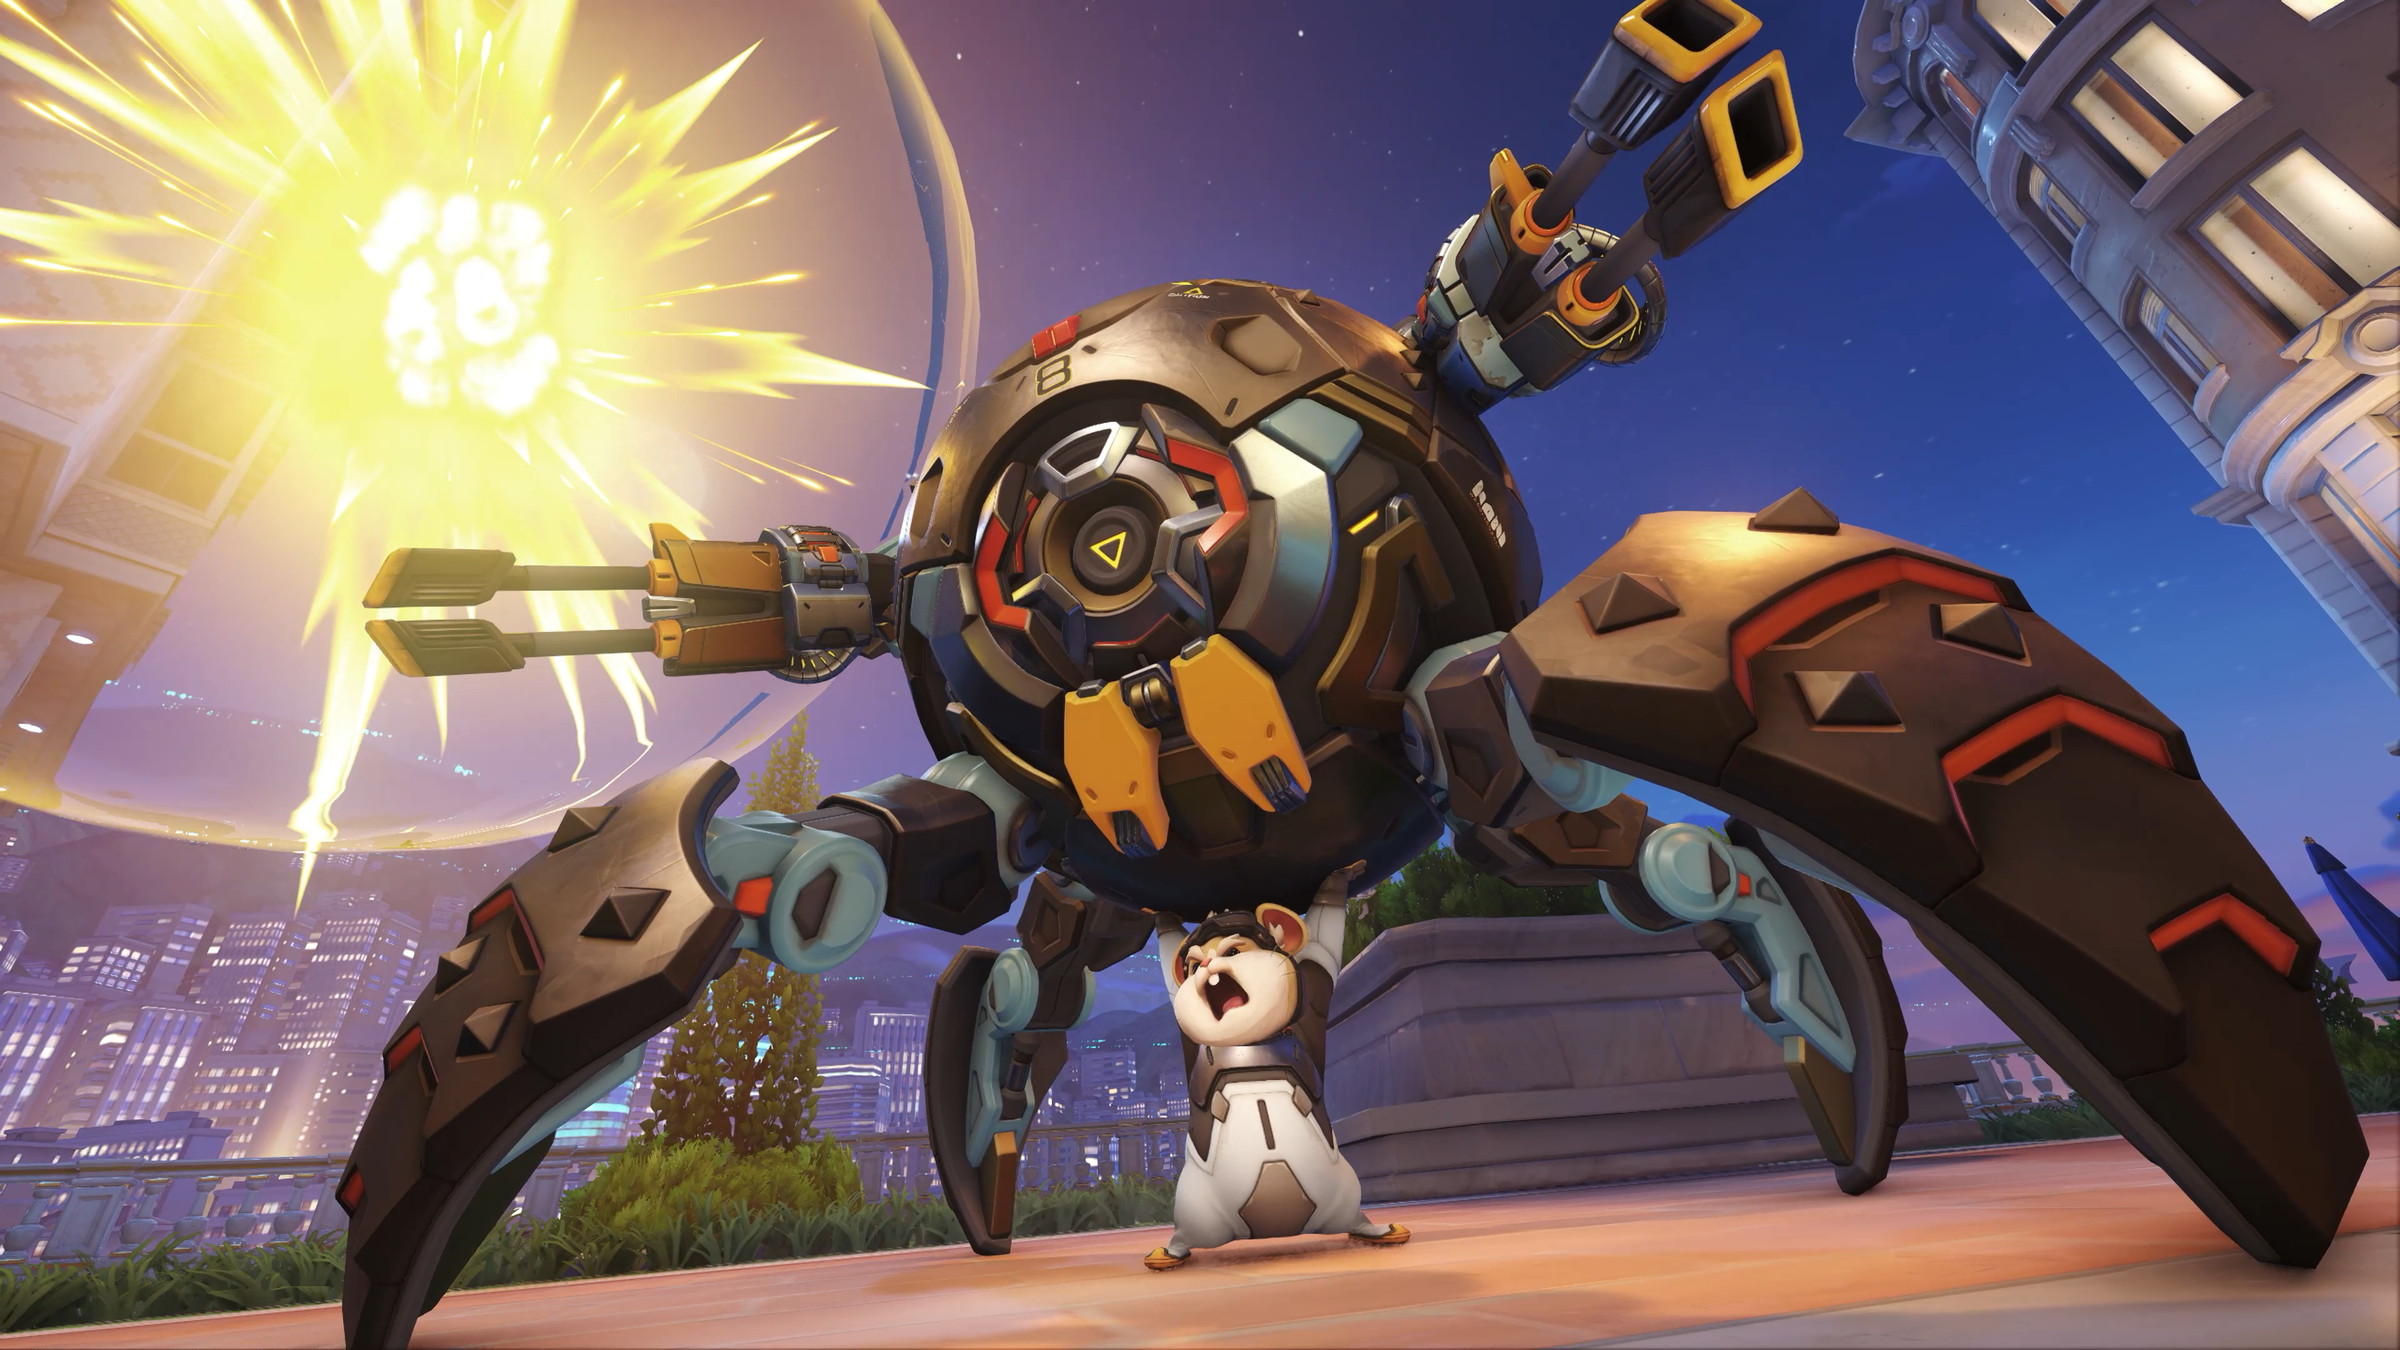 Screenshot of the Overwatch 2 hero Wrecking Ball, a small tan hamster standing triumphantly underneath his mecha hamster ball outfitted with machine guns and spider-like legs.